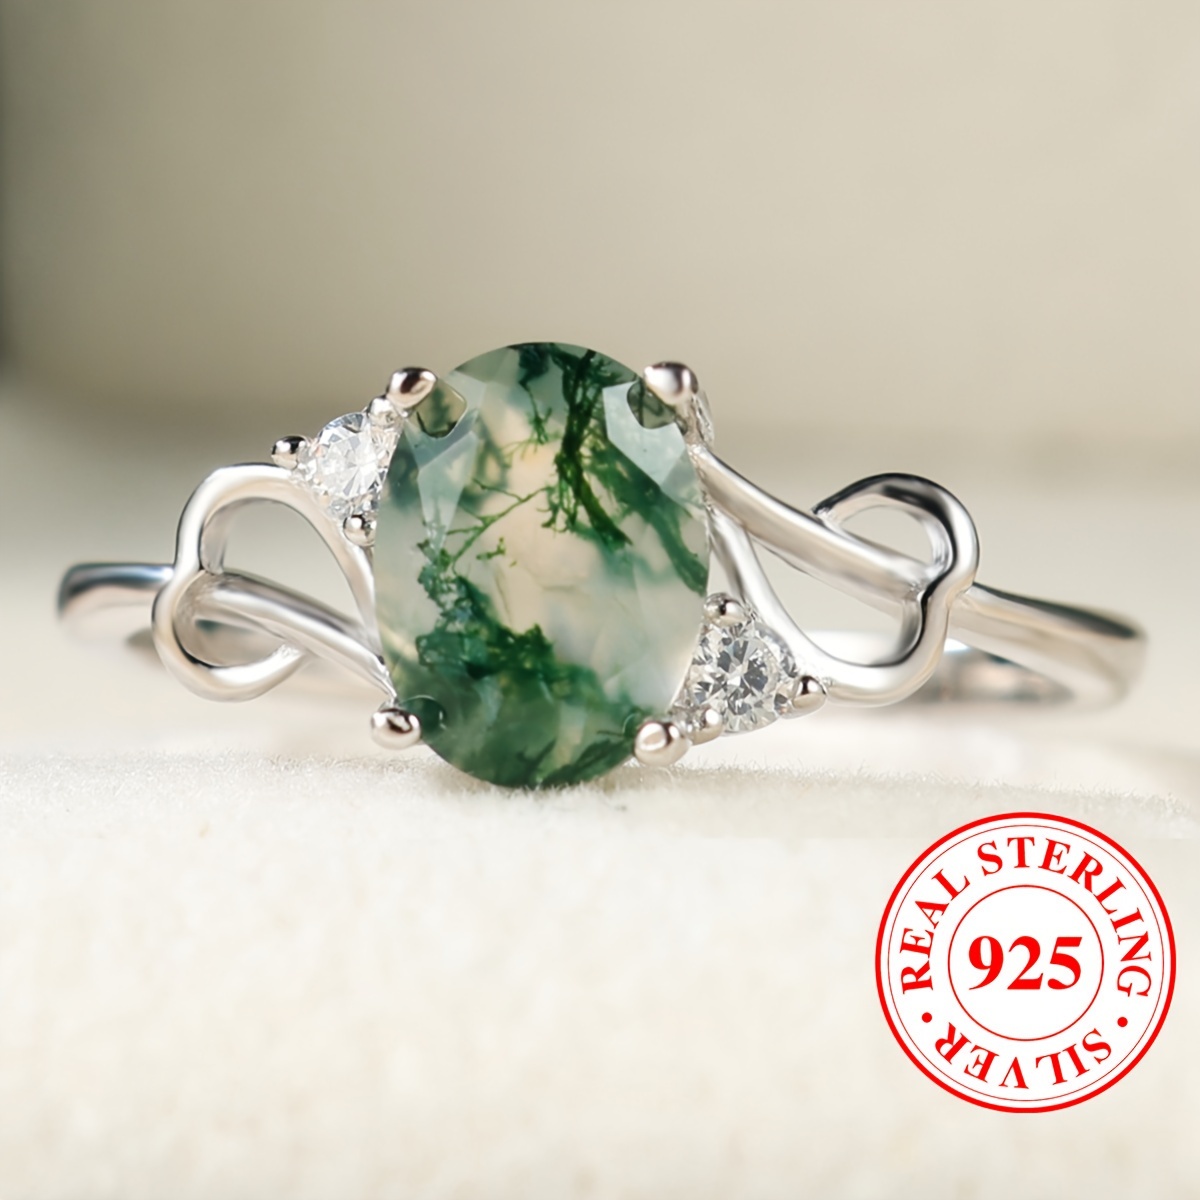 

925 Sterling Silver Ring Inlaid Moss Agate High Quality Engagement/ Wedding Ring For Brides Grain Of Stone May Differ From 1 Another ( The Box Is Different From That In The Picture ) 1.9g/0.07oz